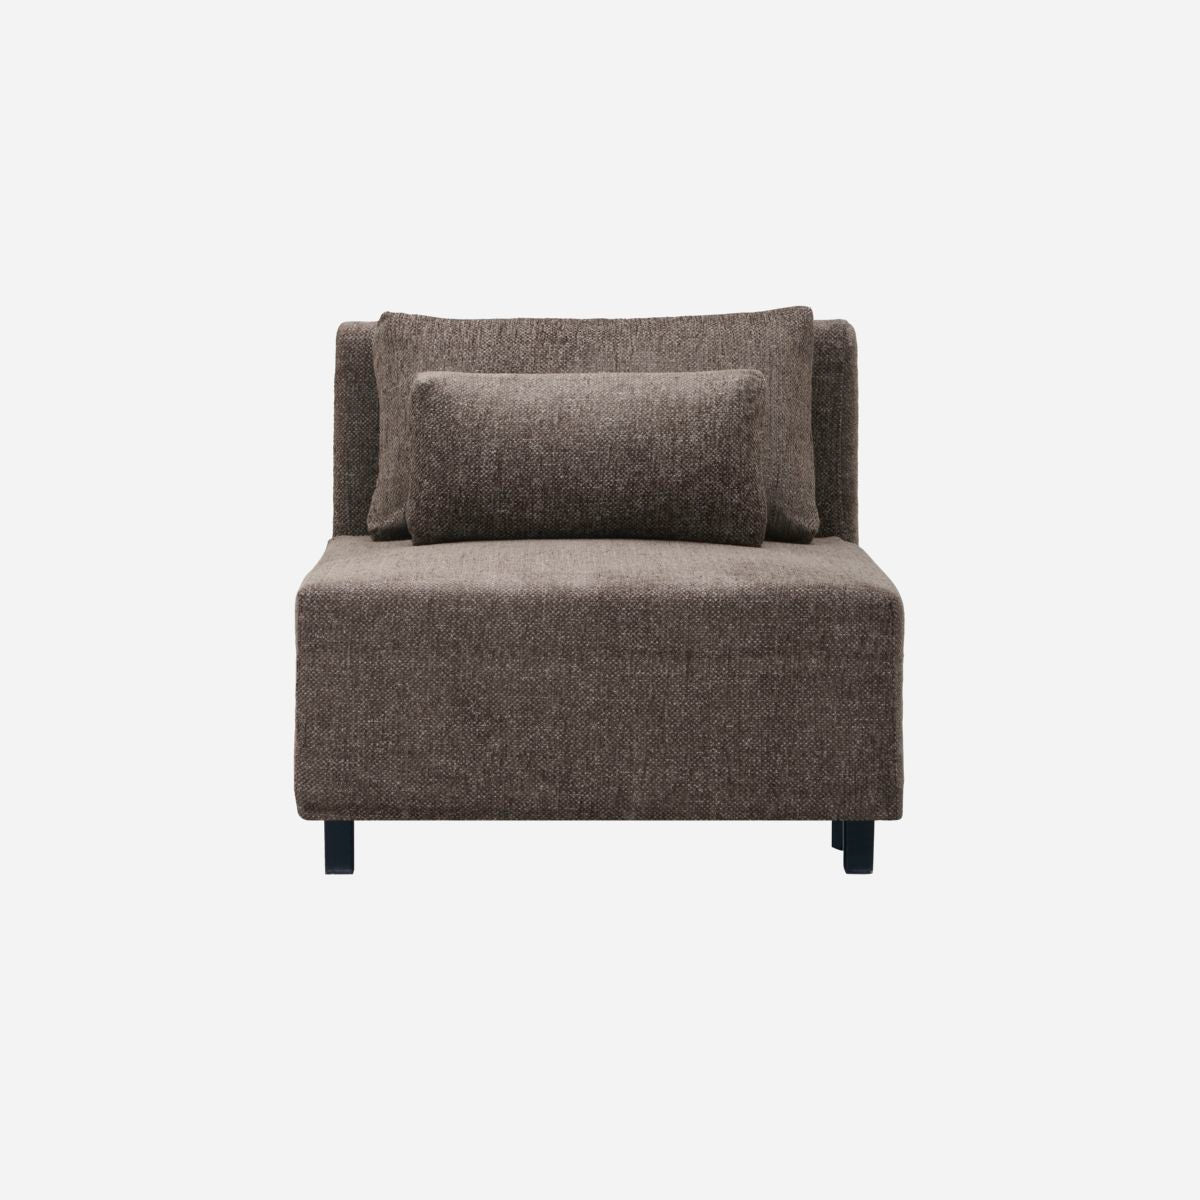 Sofa, Middle section, Camphor, Dark brown